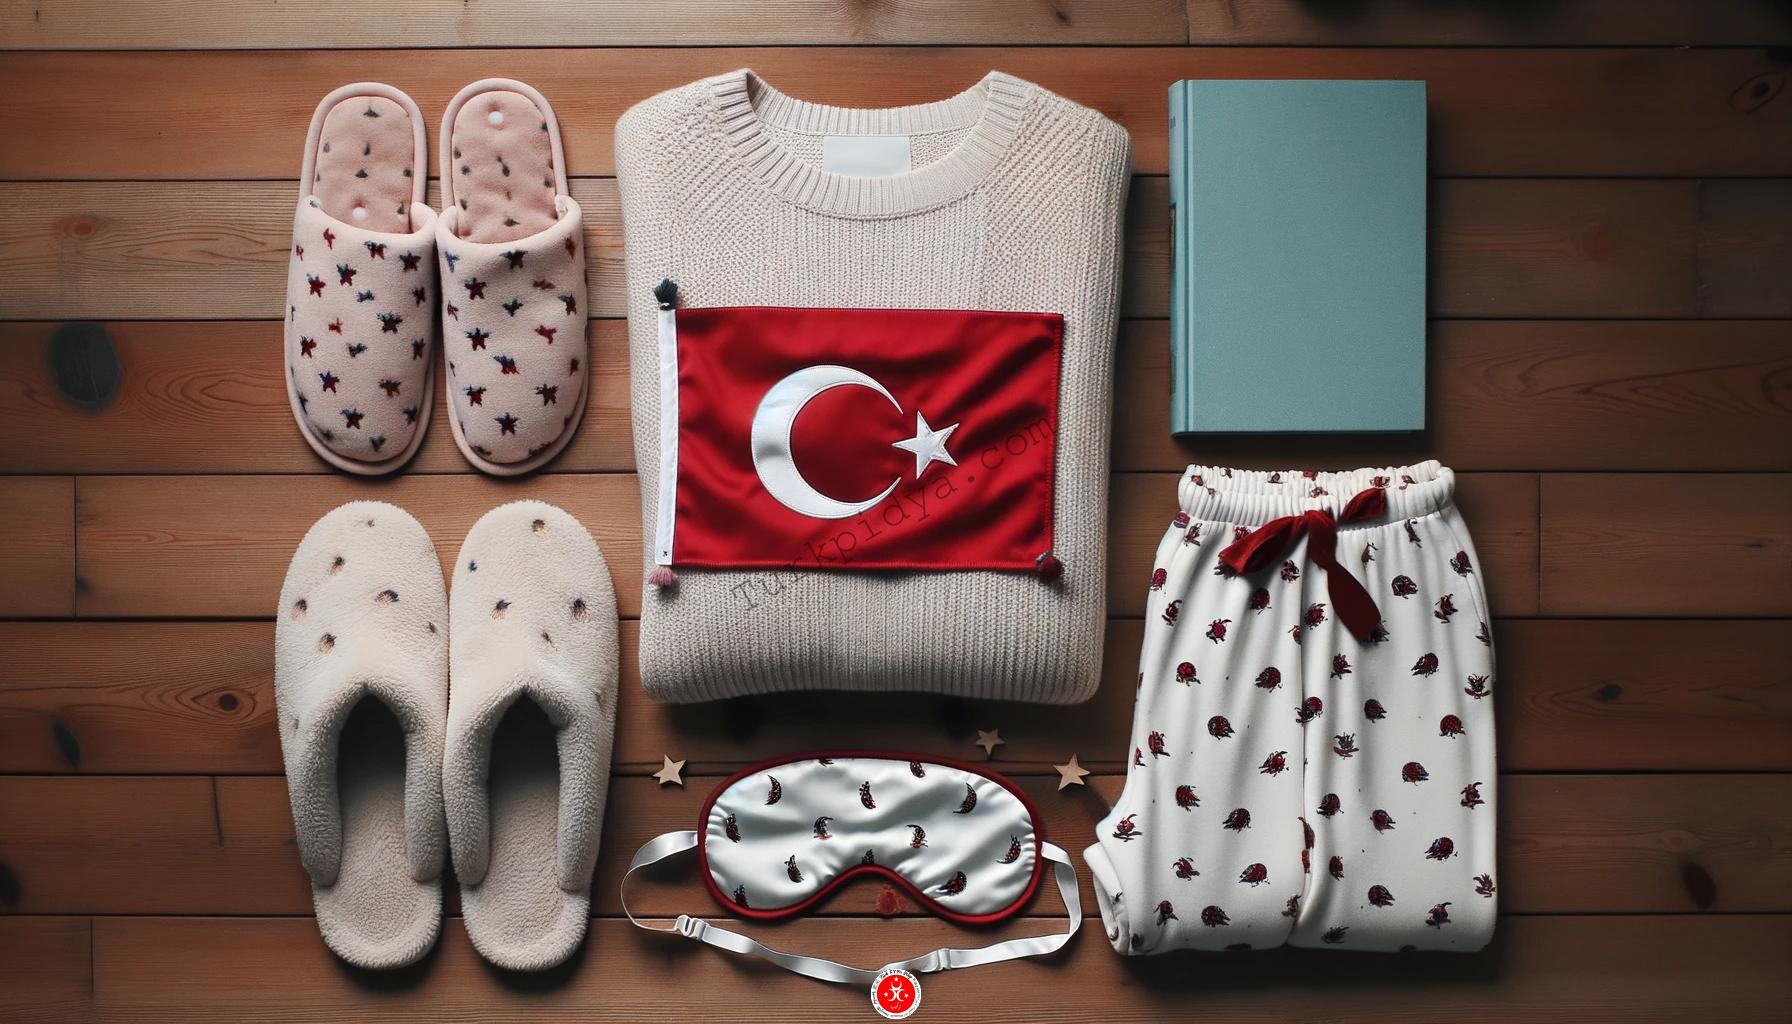 Buying clothing from Turkey online